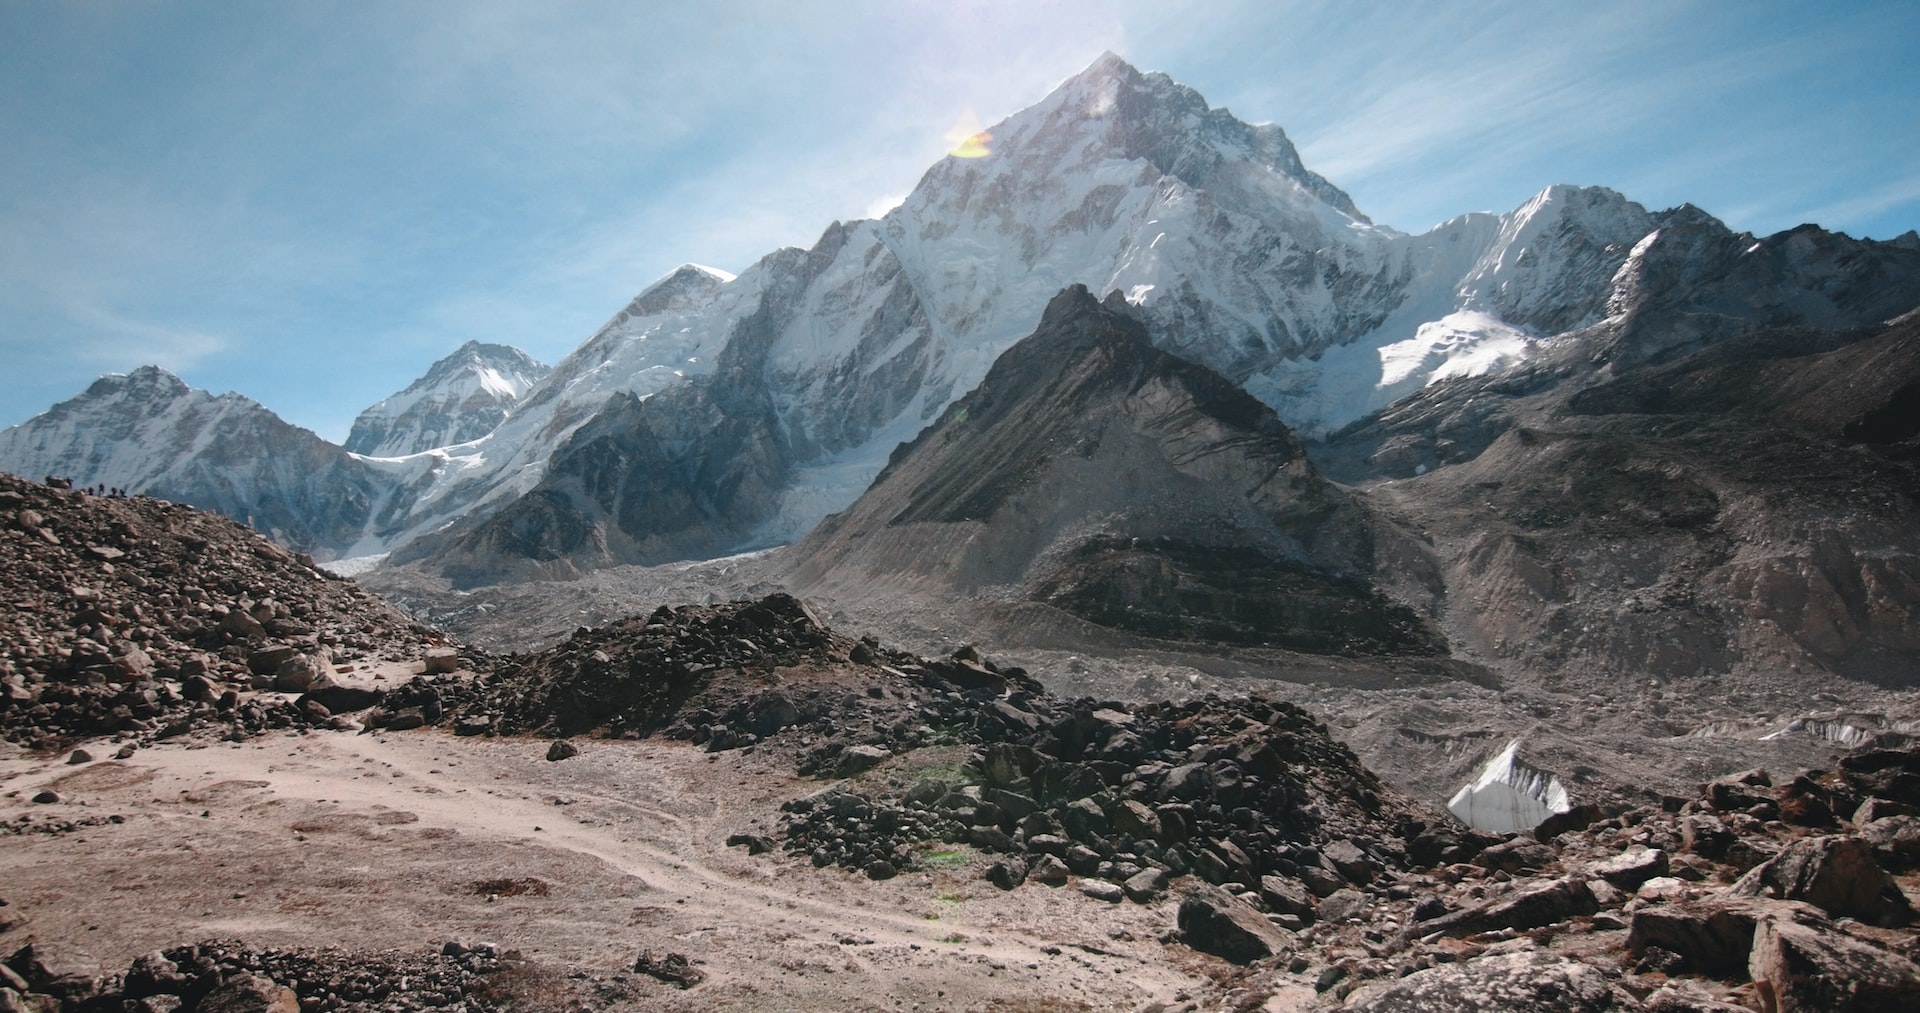 Can a beginner in trekking can trek to Everest base camp and Gokyo Lake?